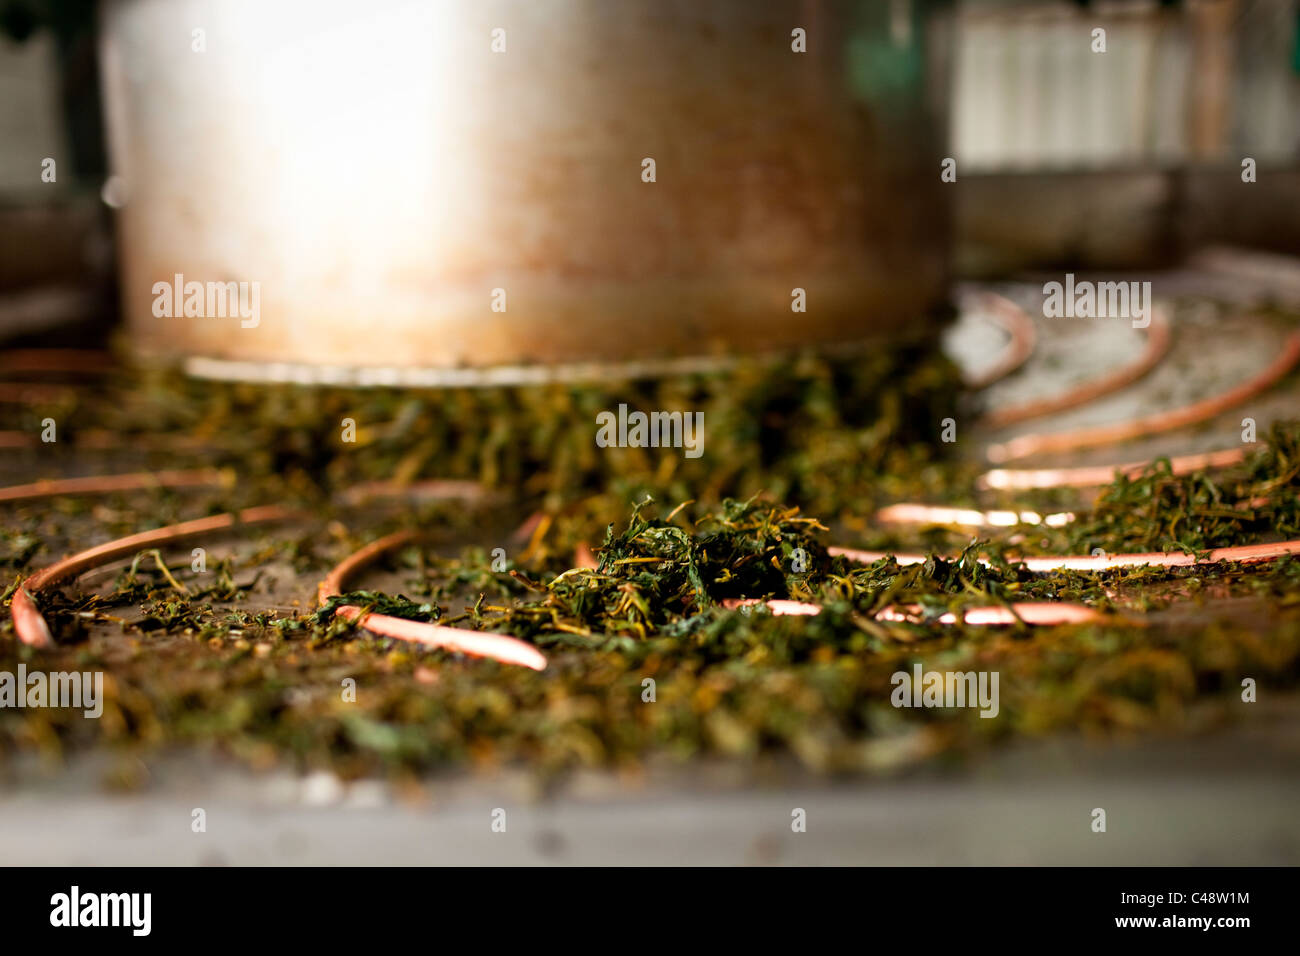 Tea leaves are pressed before drying, Central Taiwan, October 22, 2010. Stock Photo